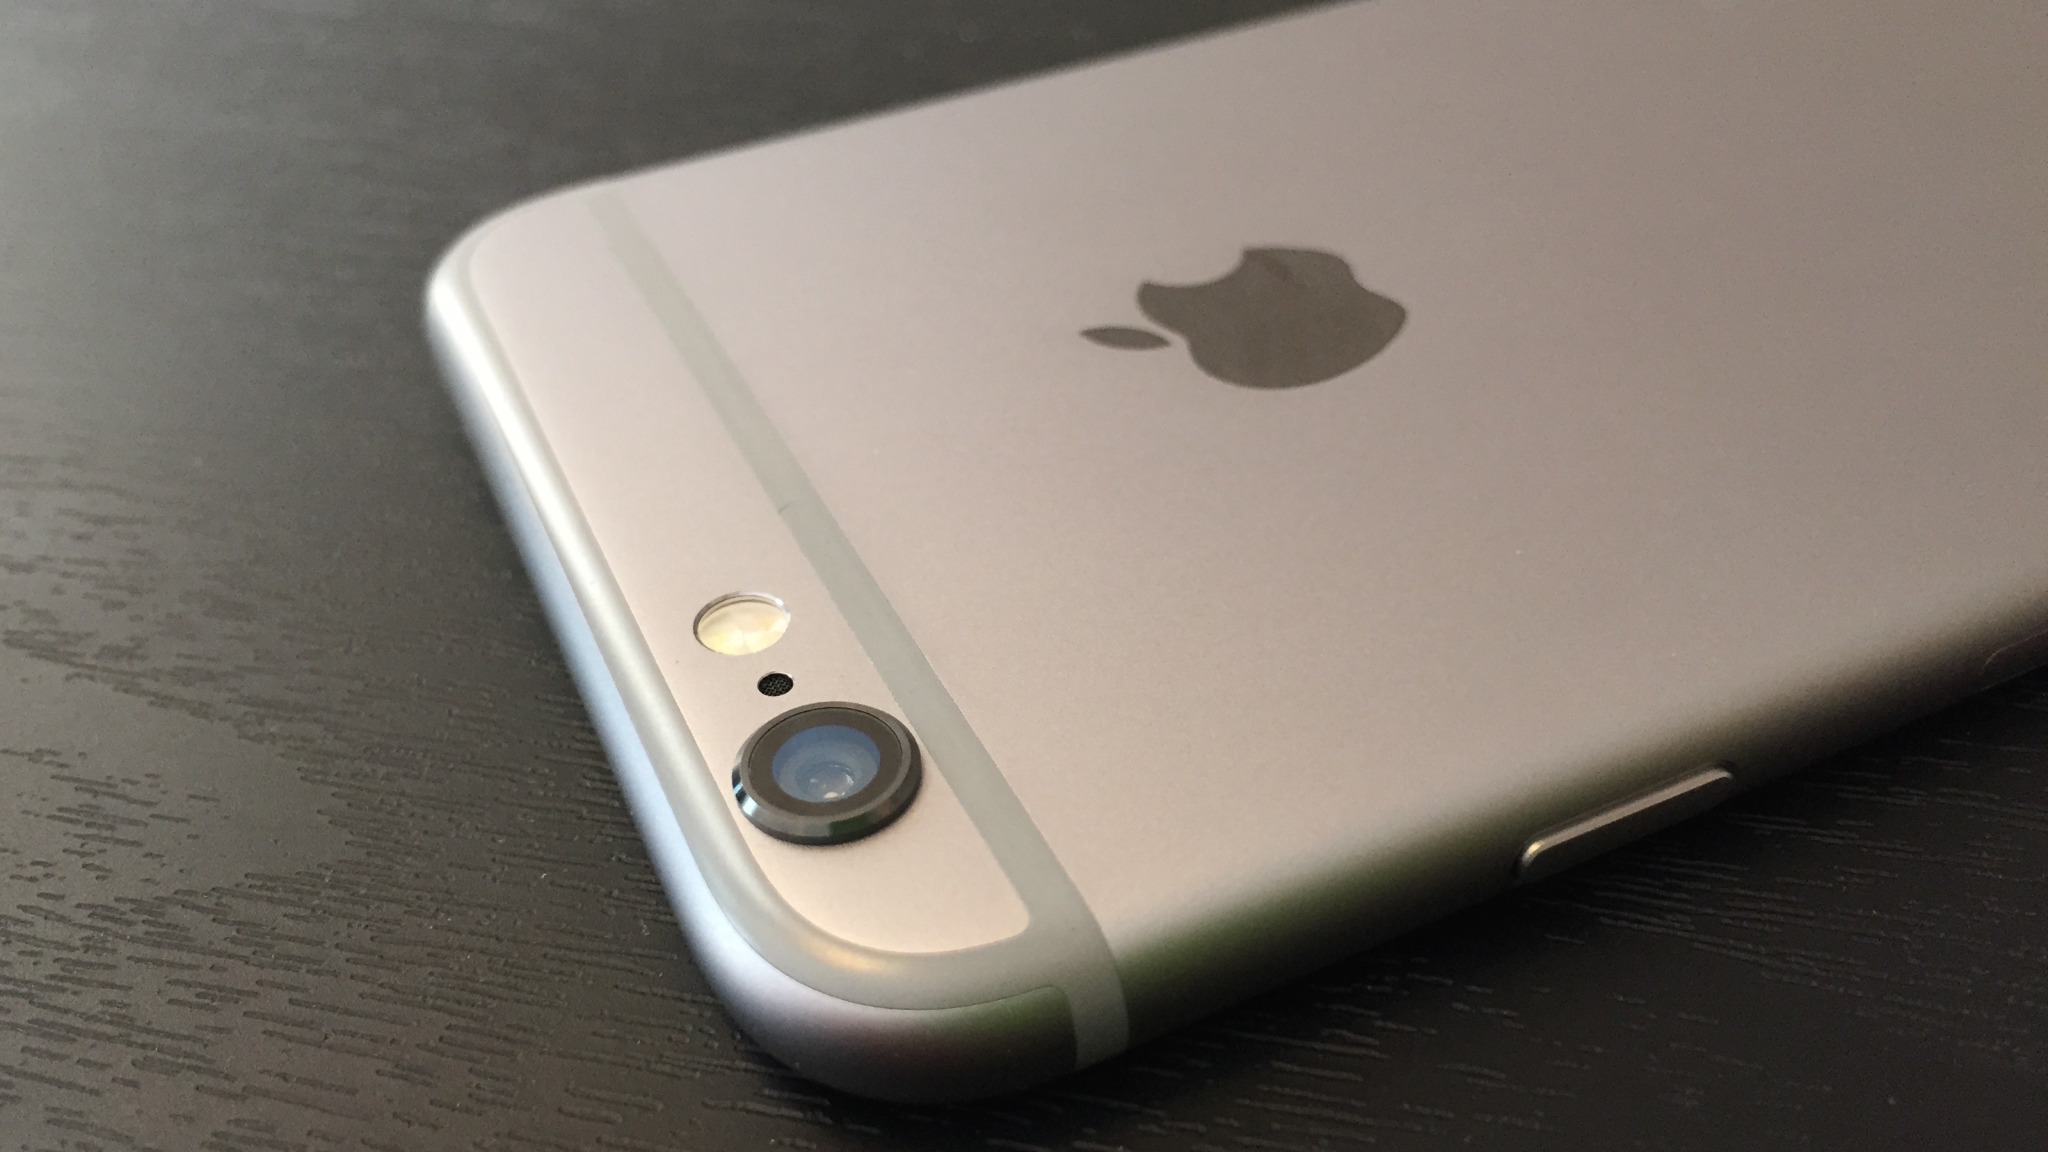 iPhone 6's lens juts out from the body, risking damage. It's another reason for a case.